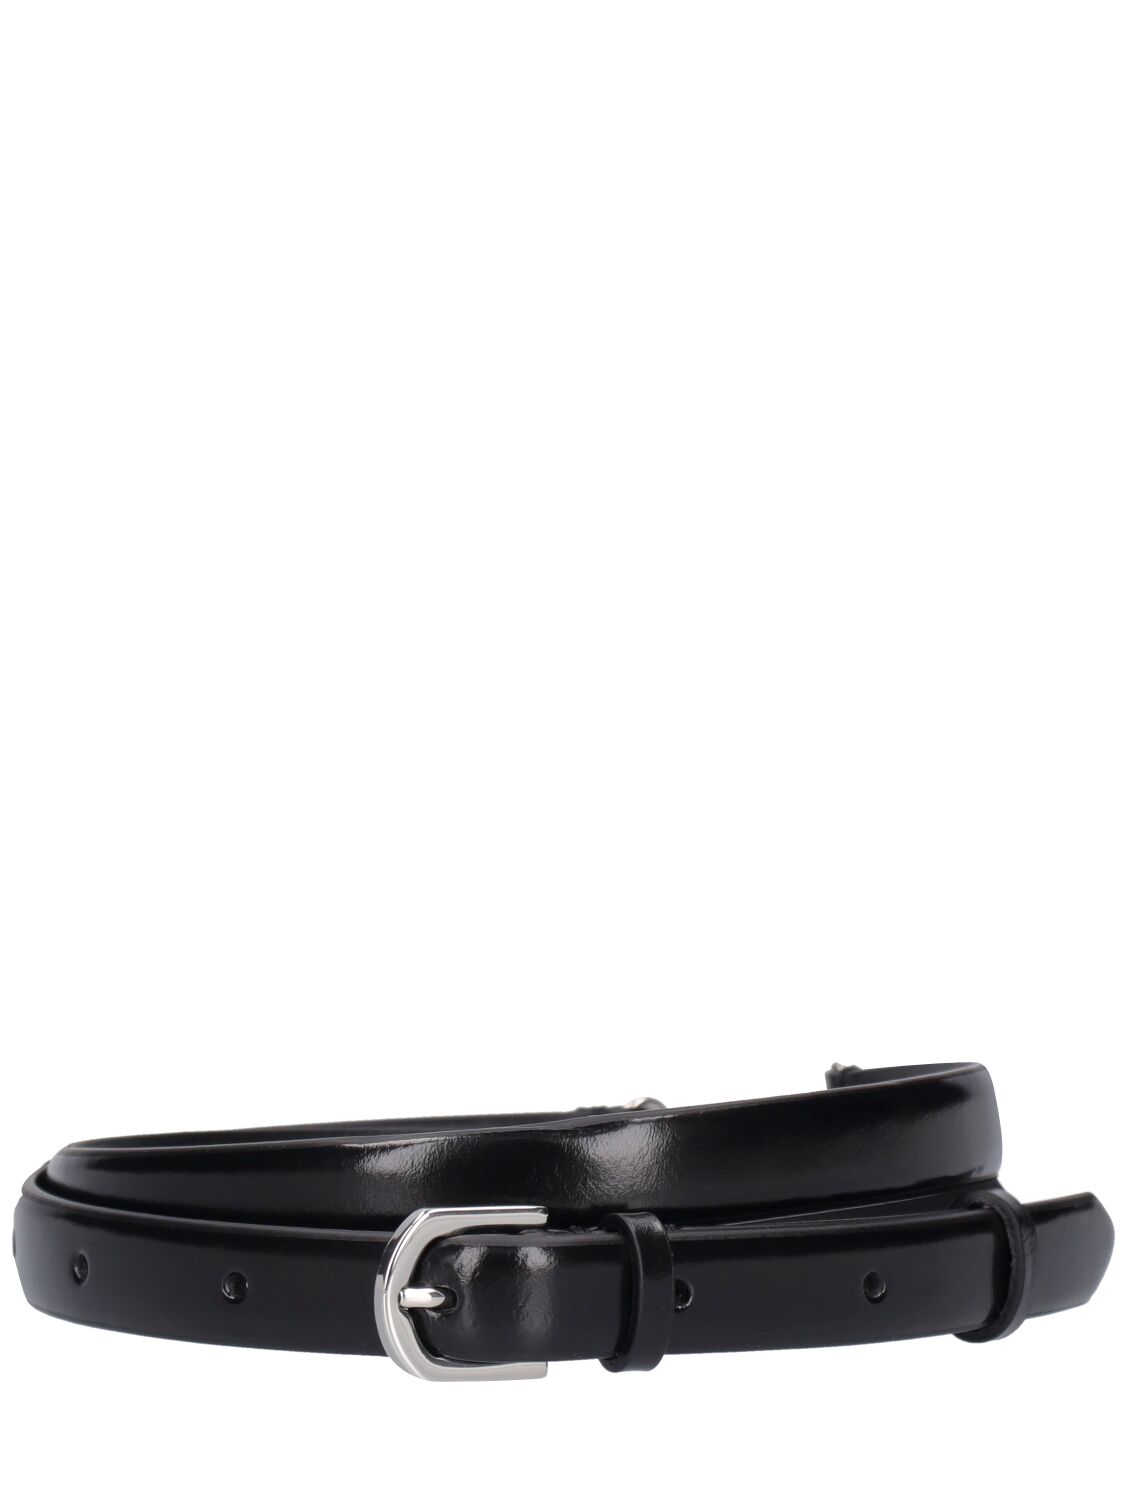 Image of Double Claps Leather Belt